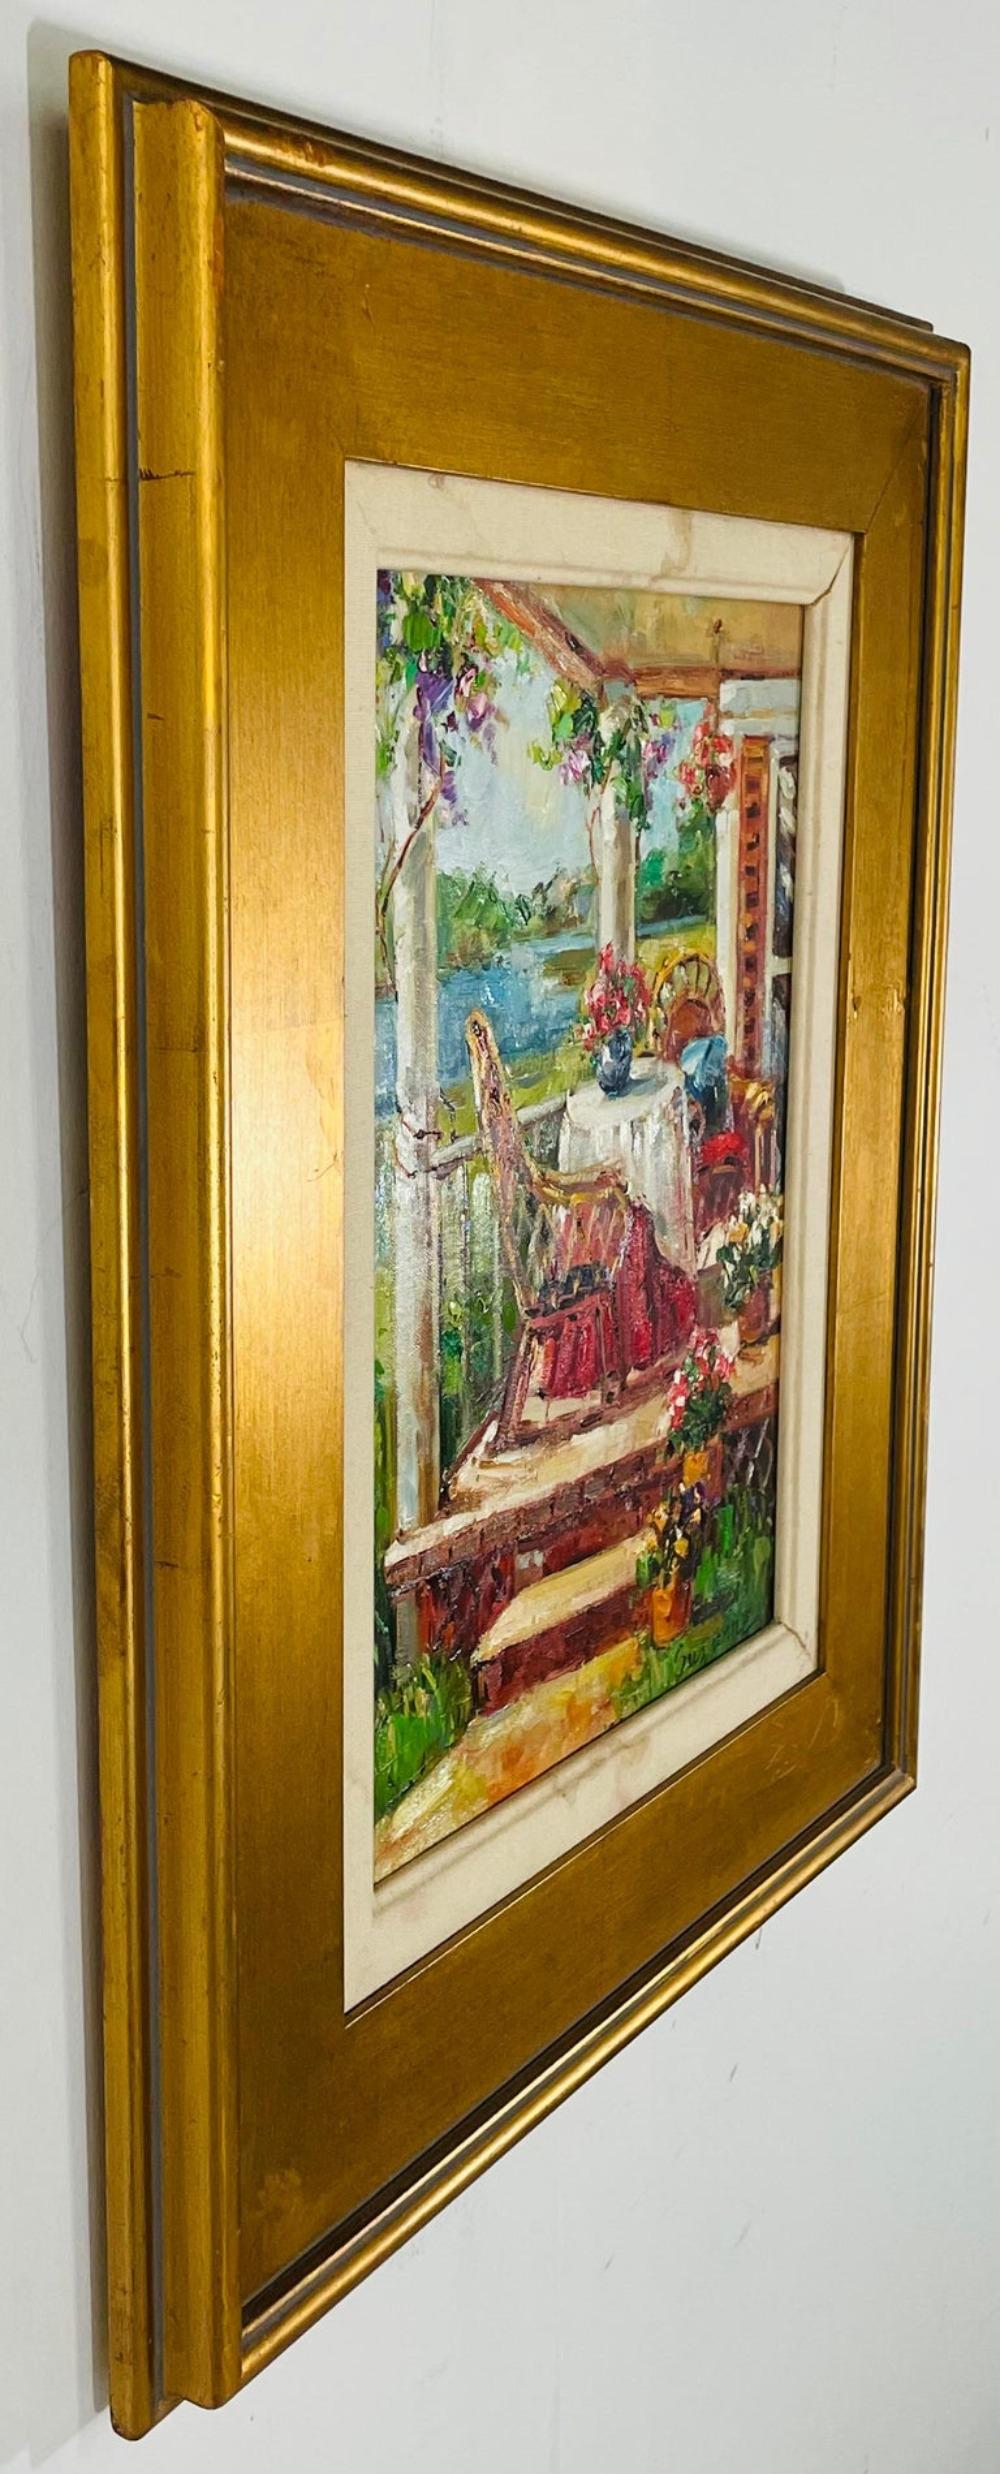 An 1980's gorgeous oil on canvas painting of a home porch. The painting depicting a view of an elegant country home deck by the lack. This beautiful painting is finely presented in a gilt custom frame and is signed Botton right by the artist